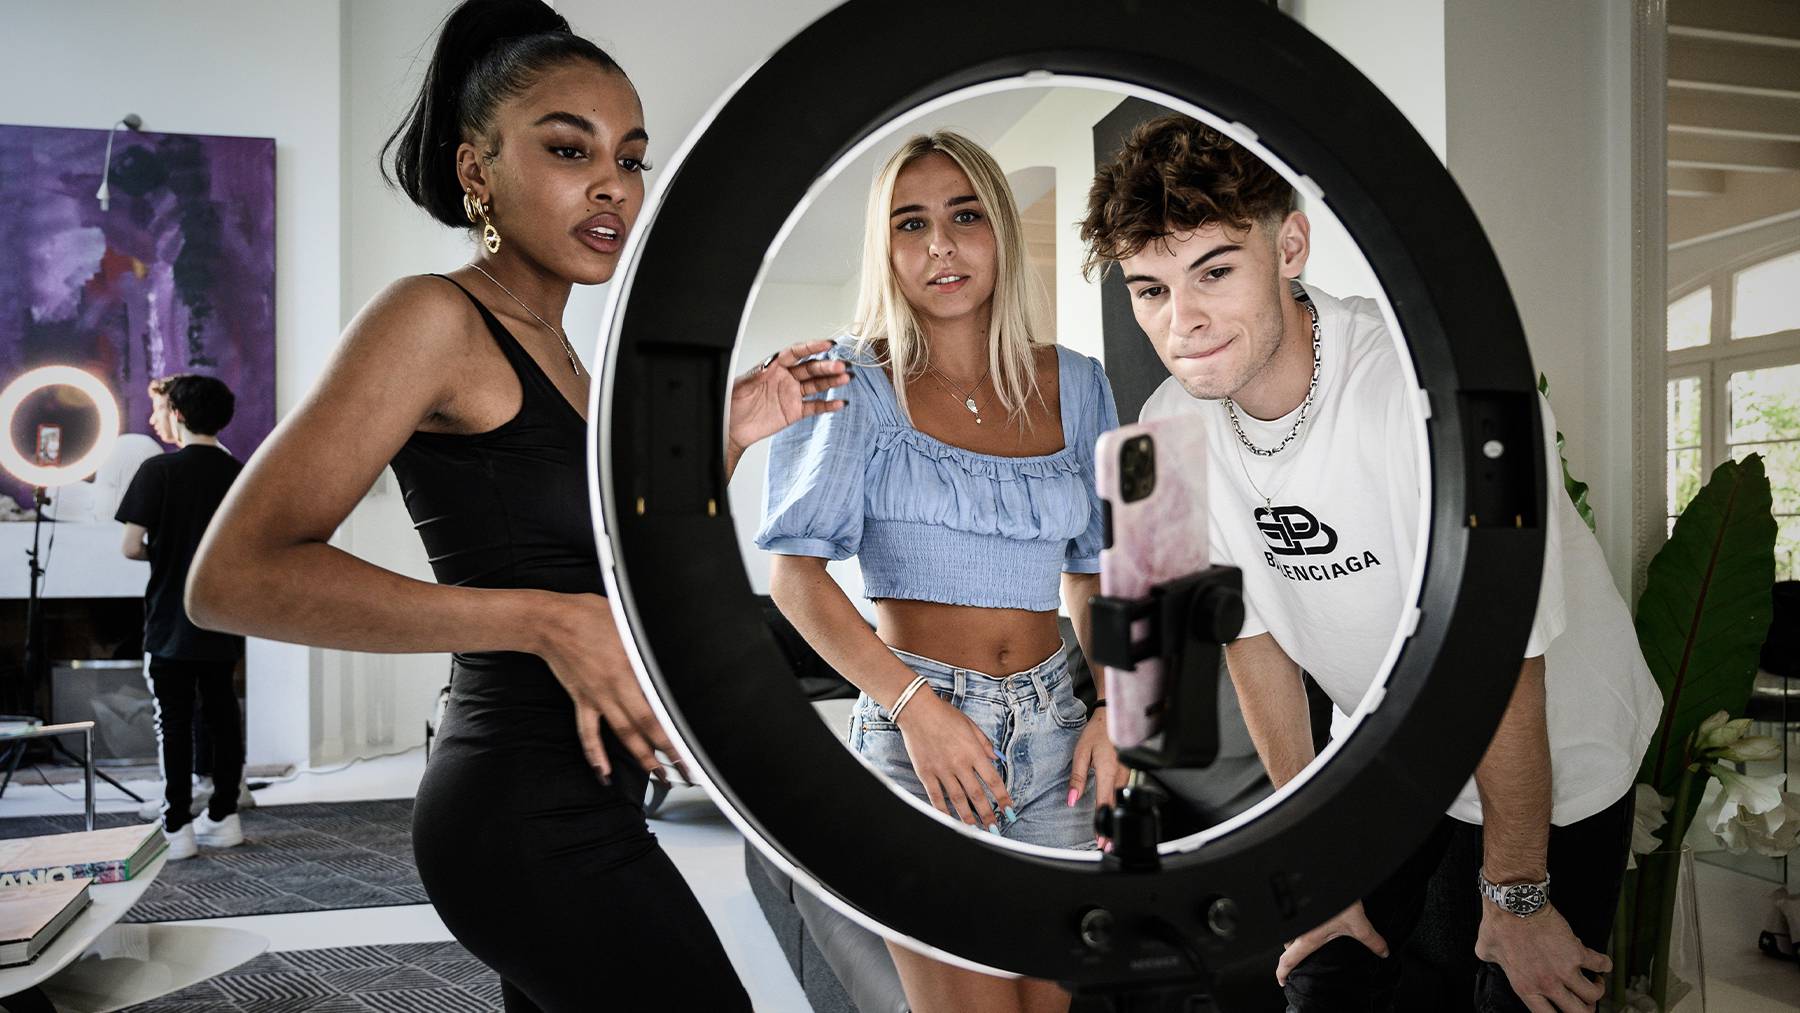 TikTok Influencers pose in front of camera and ring light.